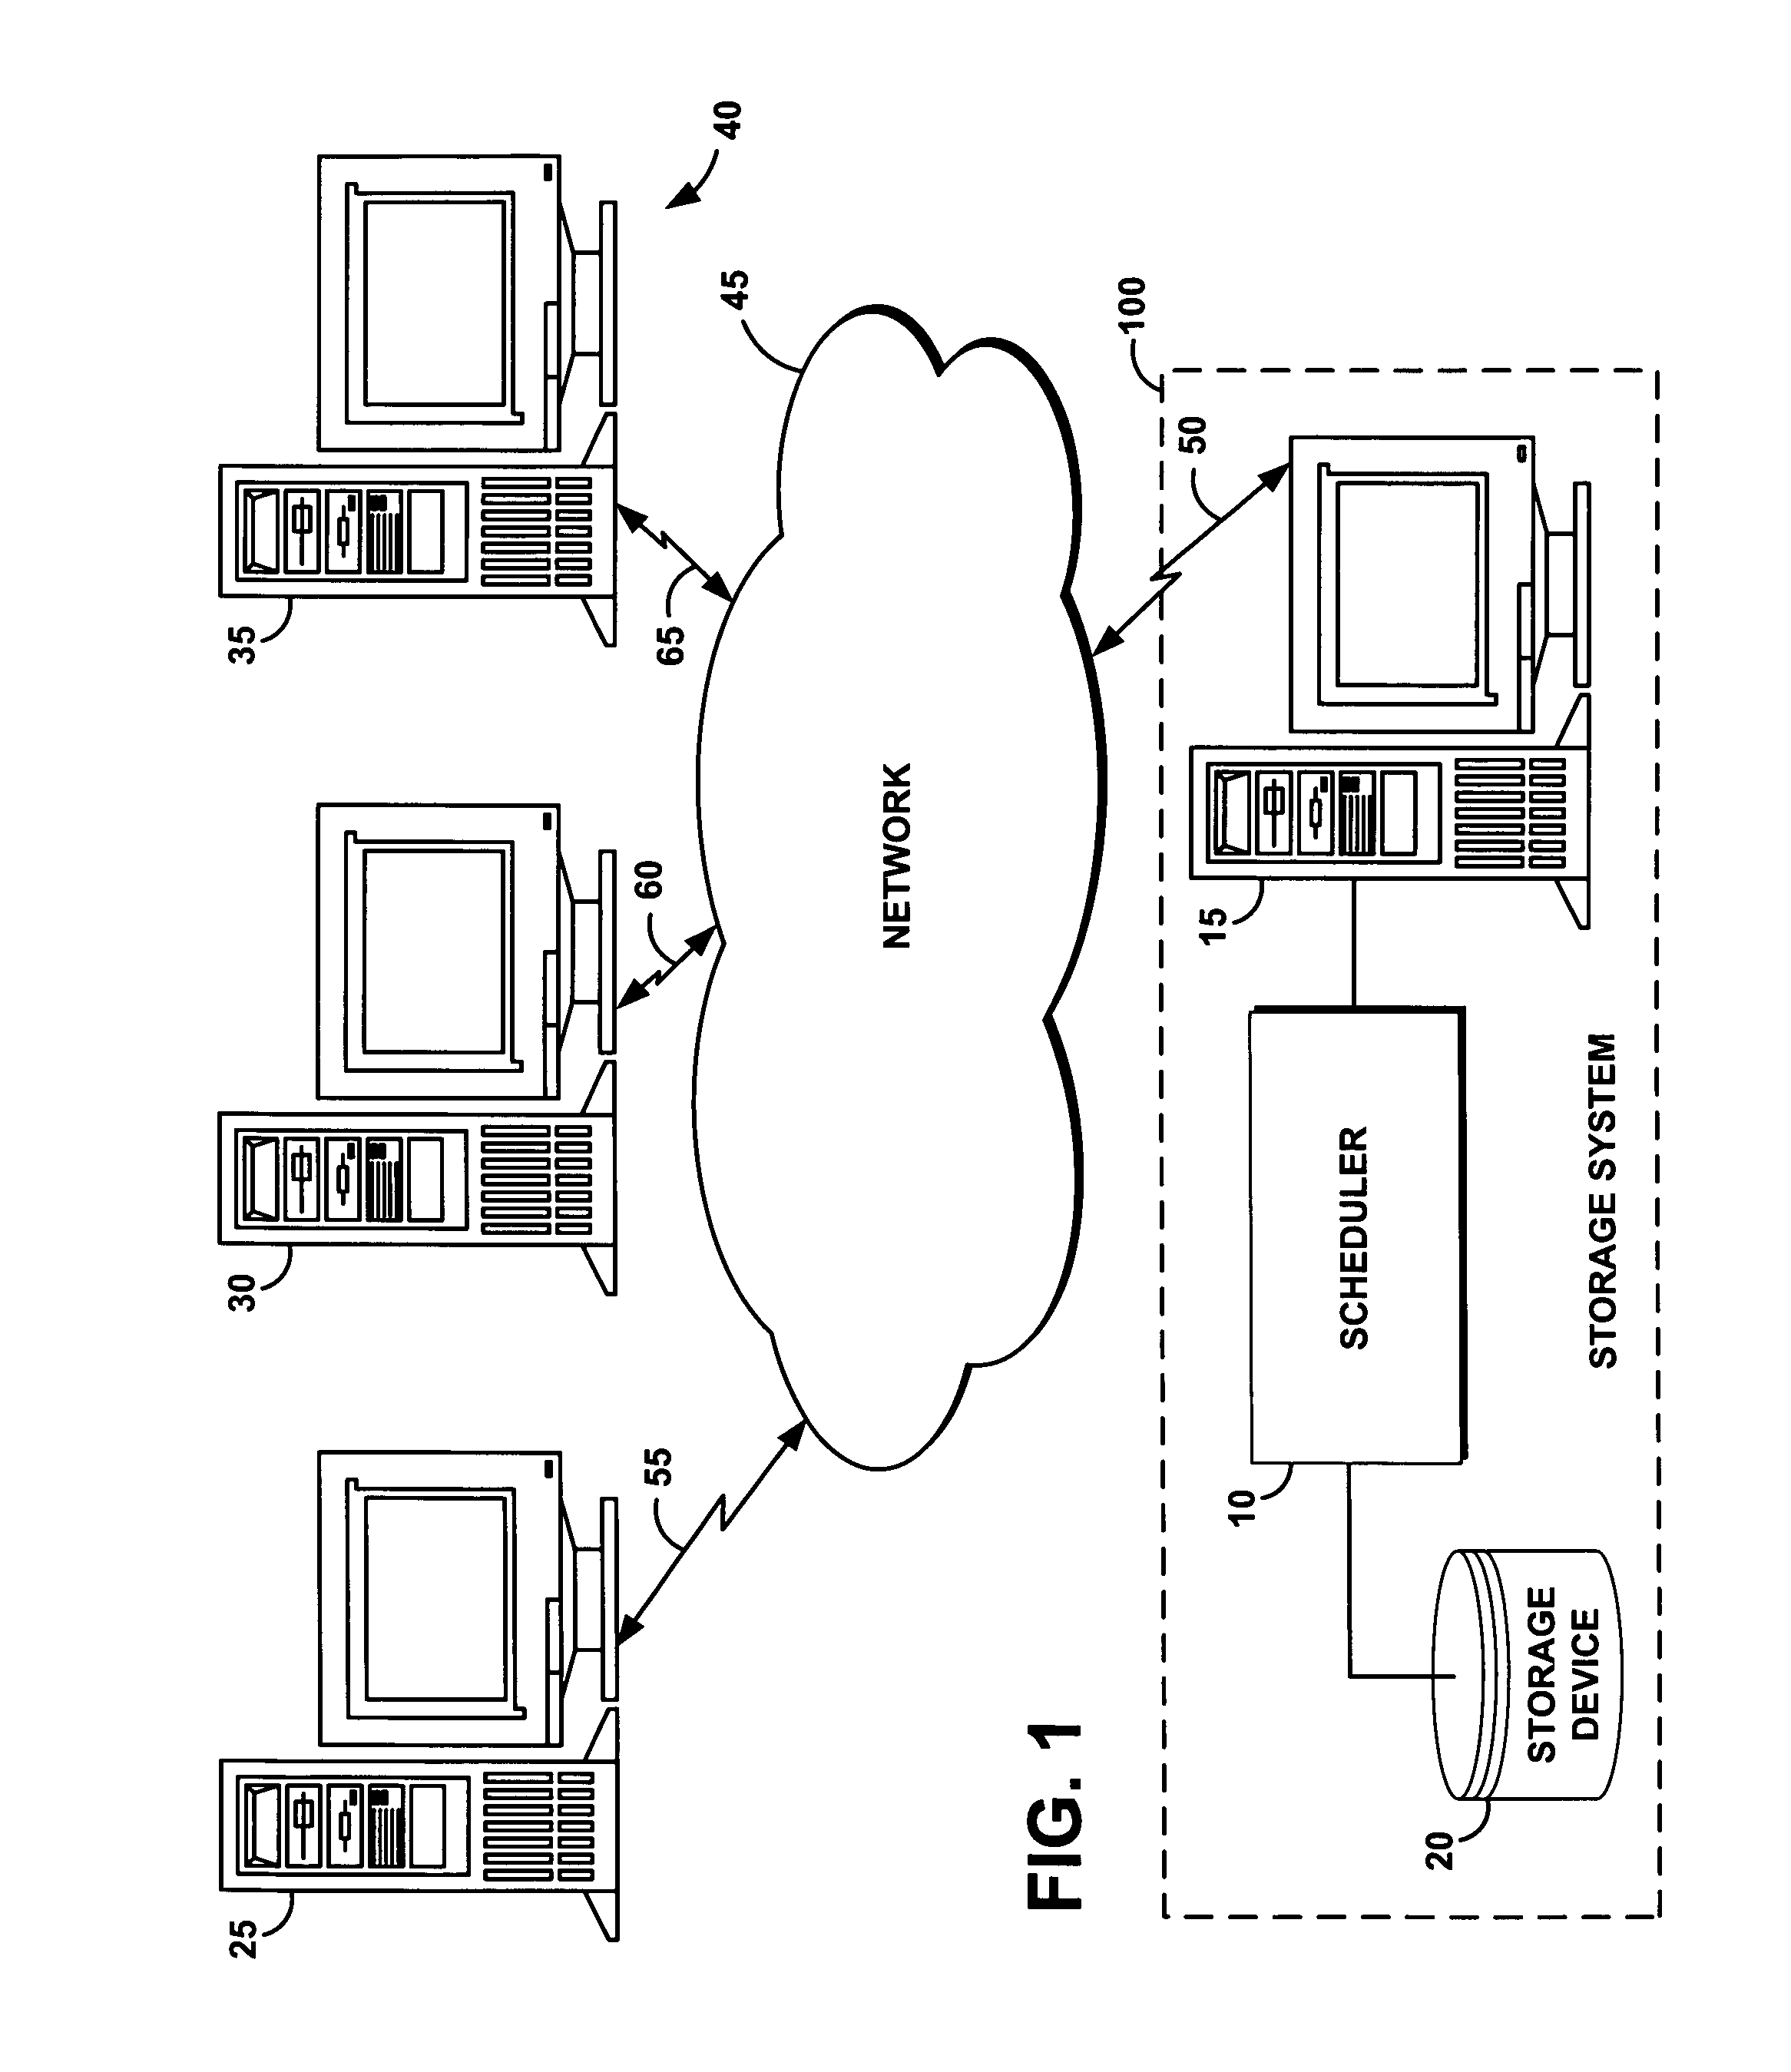 System and method for managing storage system performance as a resource